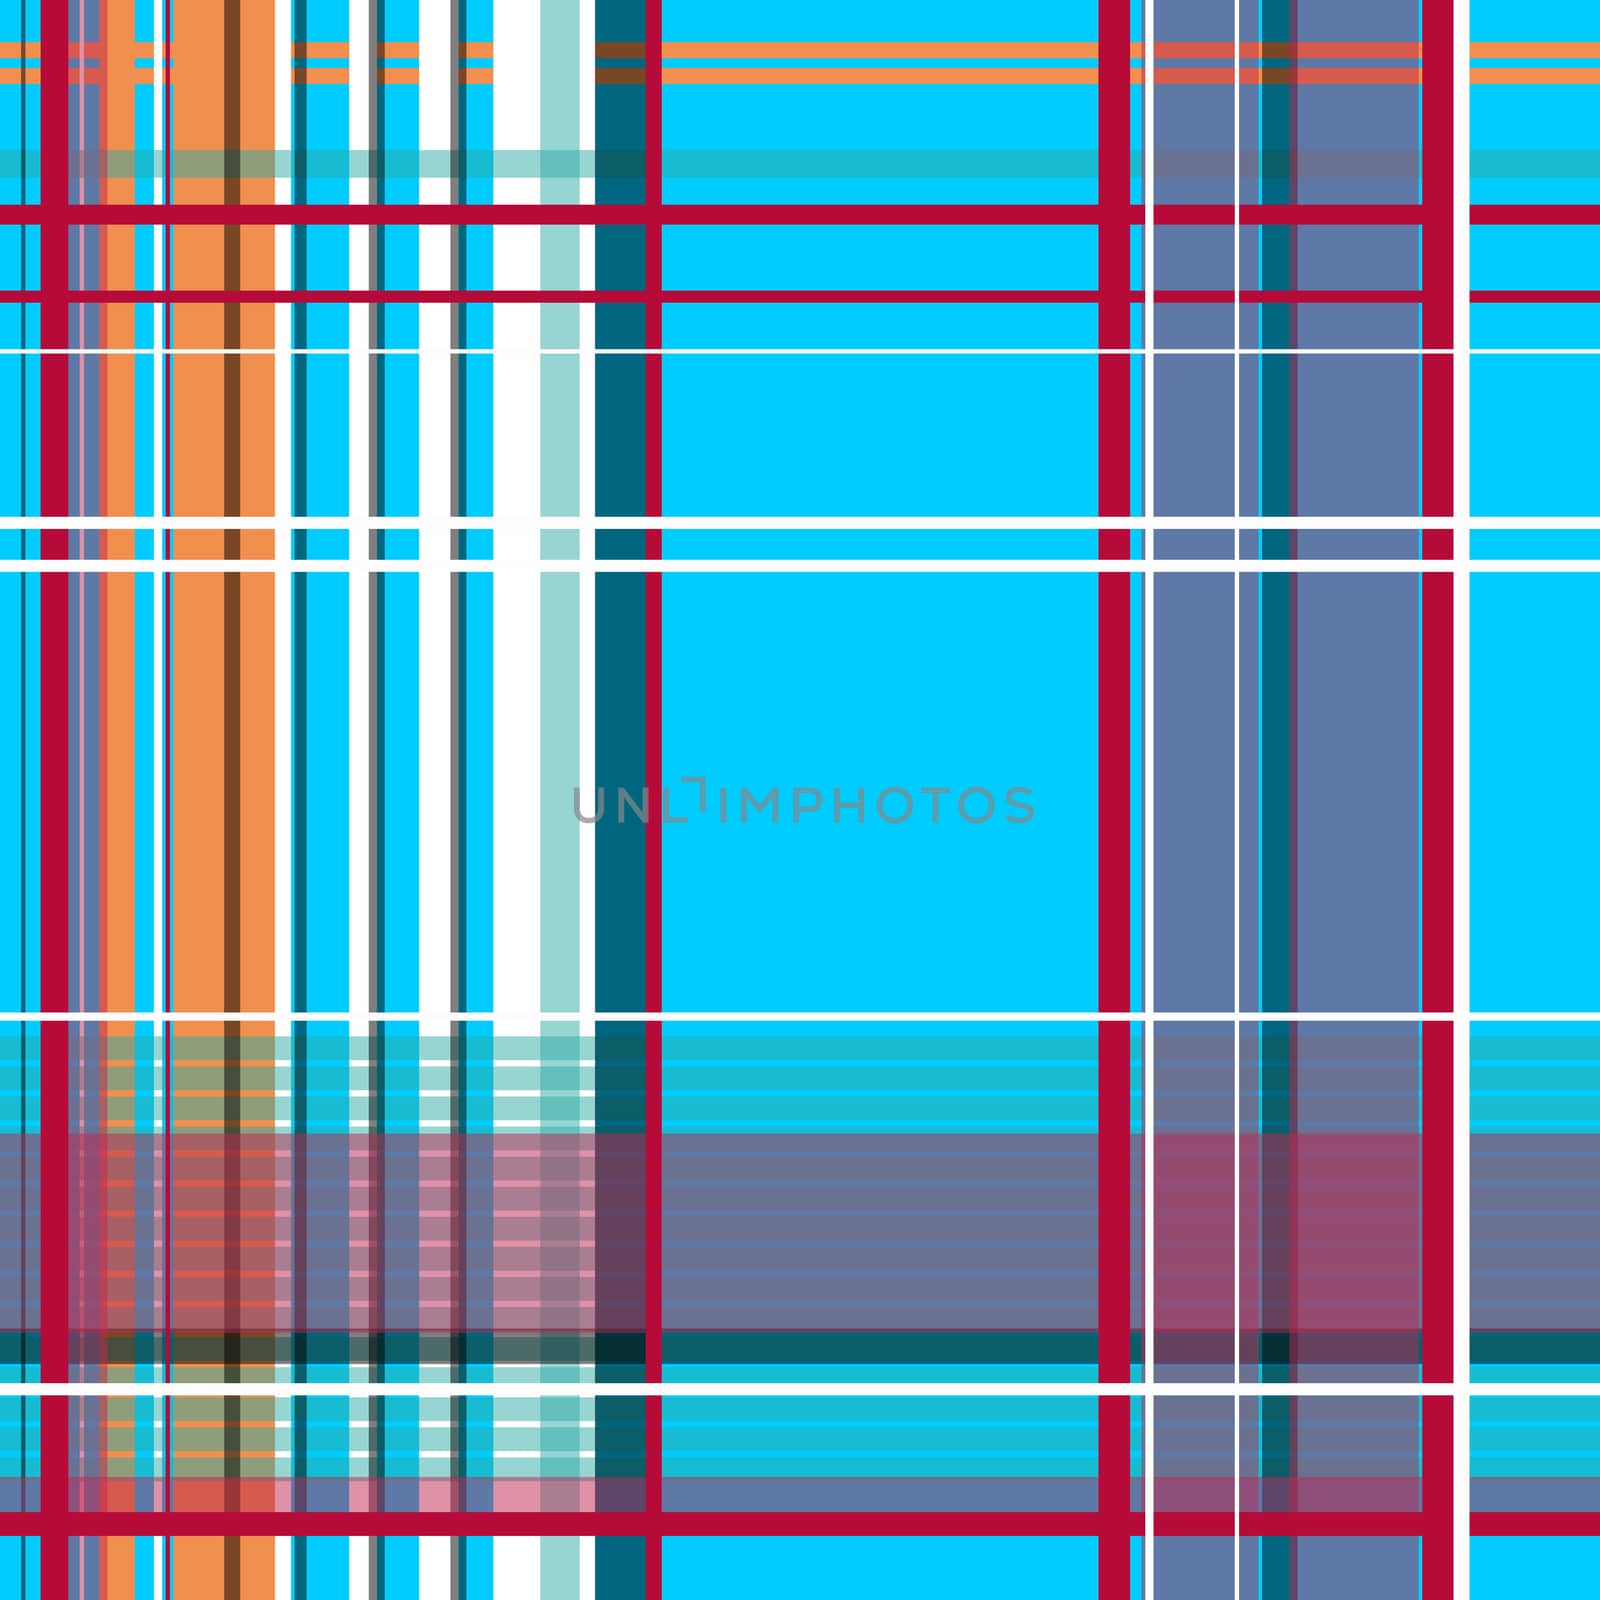 Plaid blue, orange and red, seamless tileable digital graphic